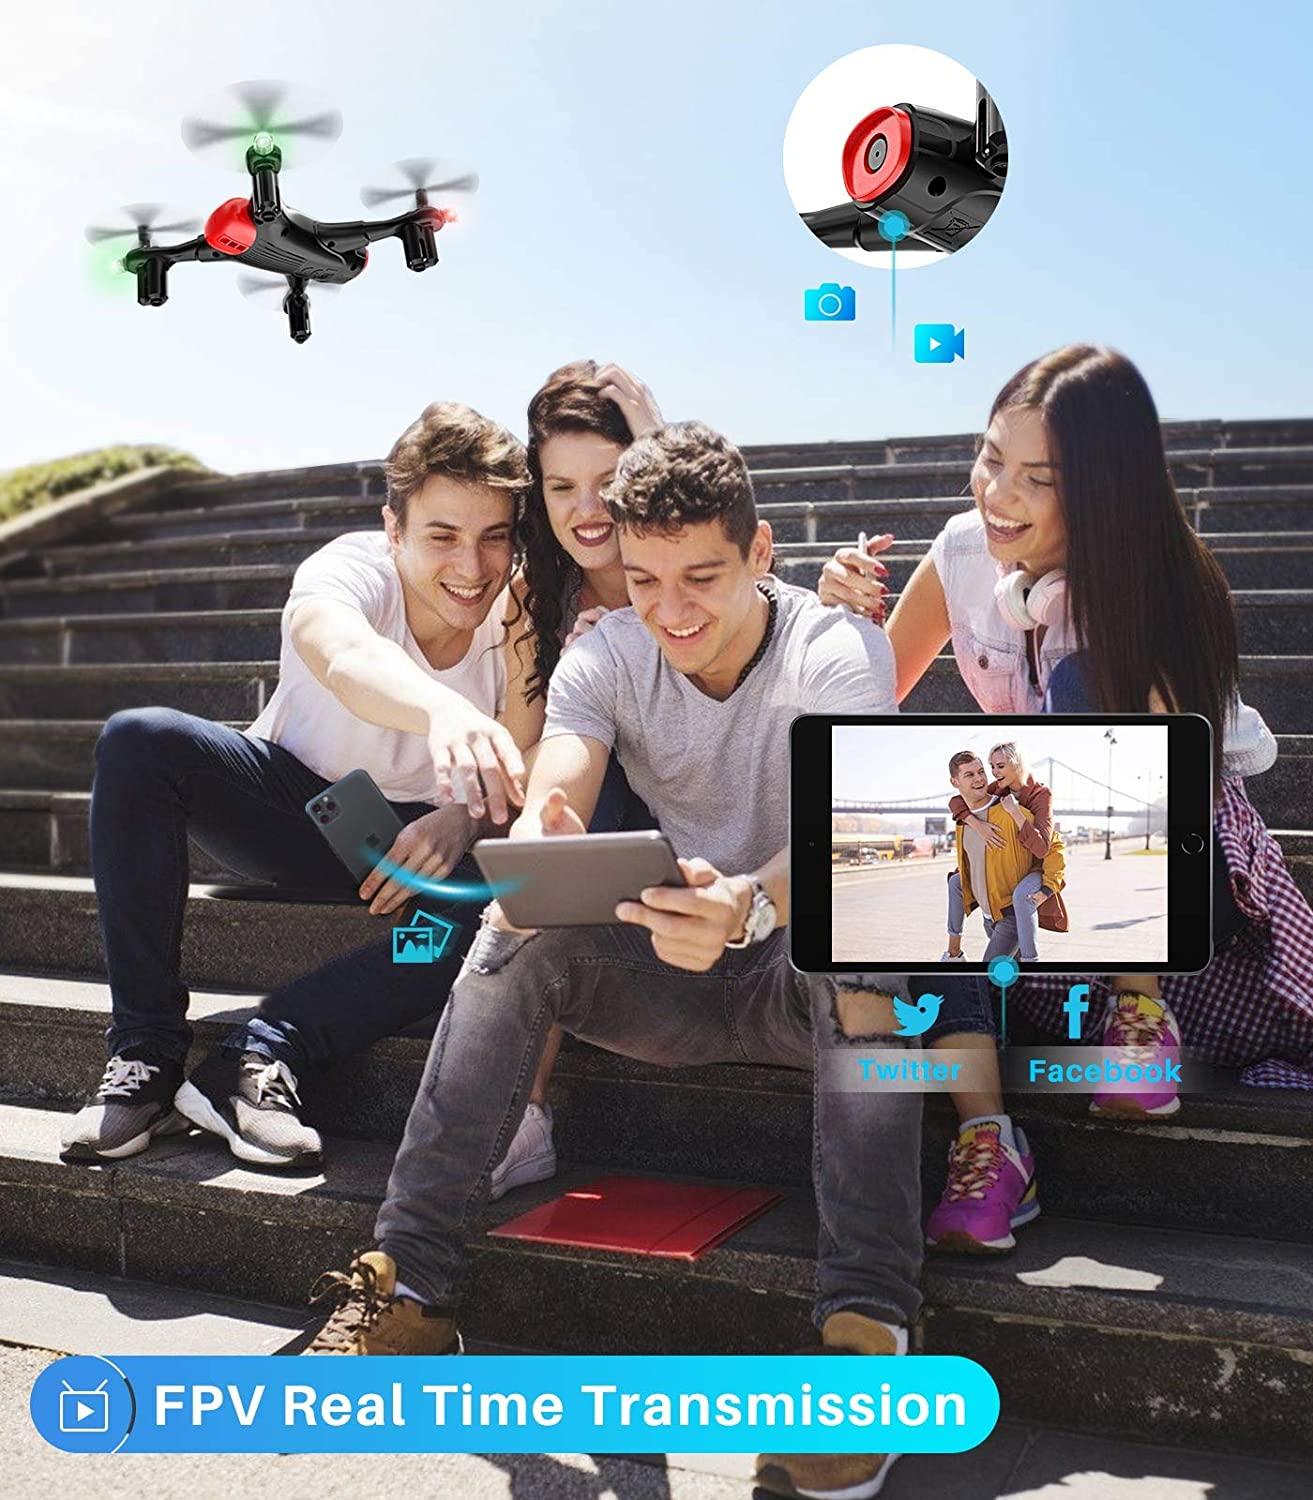 Syma X400 Mini Drone - with Camera for Adults & Kids 720P Wifi FPV Quadcopter with App Control, Altitude Hold, 3D Flip, One Key Function, Headless Mode, 2 Batteries, Easy to Fly for Beginners - RCDrone